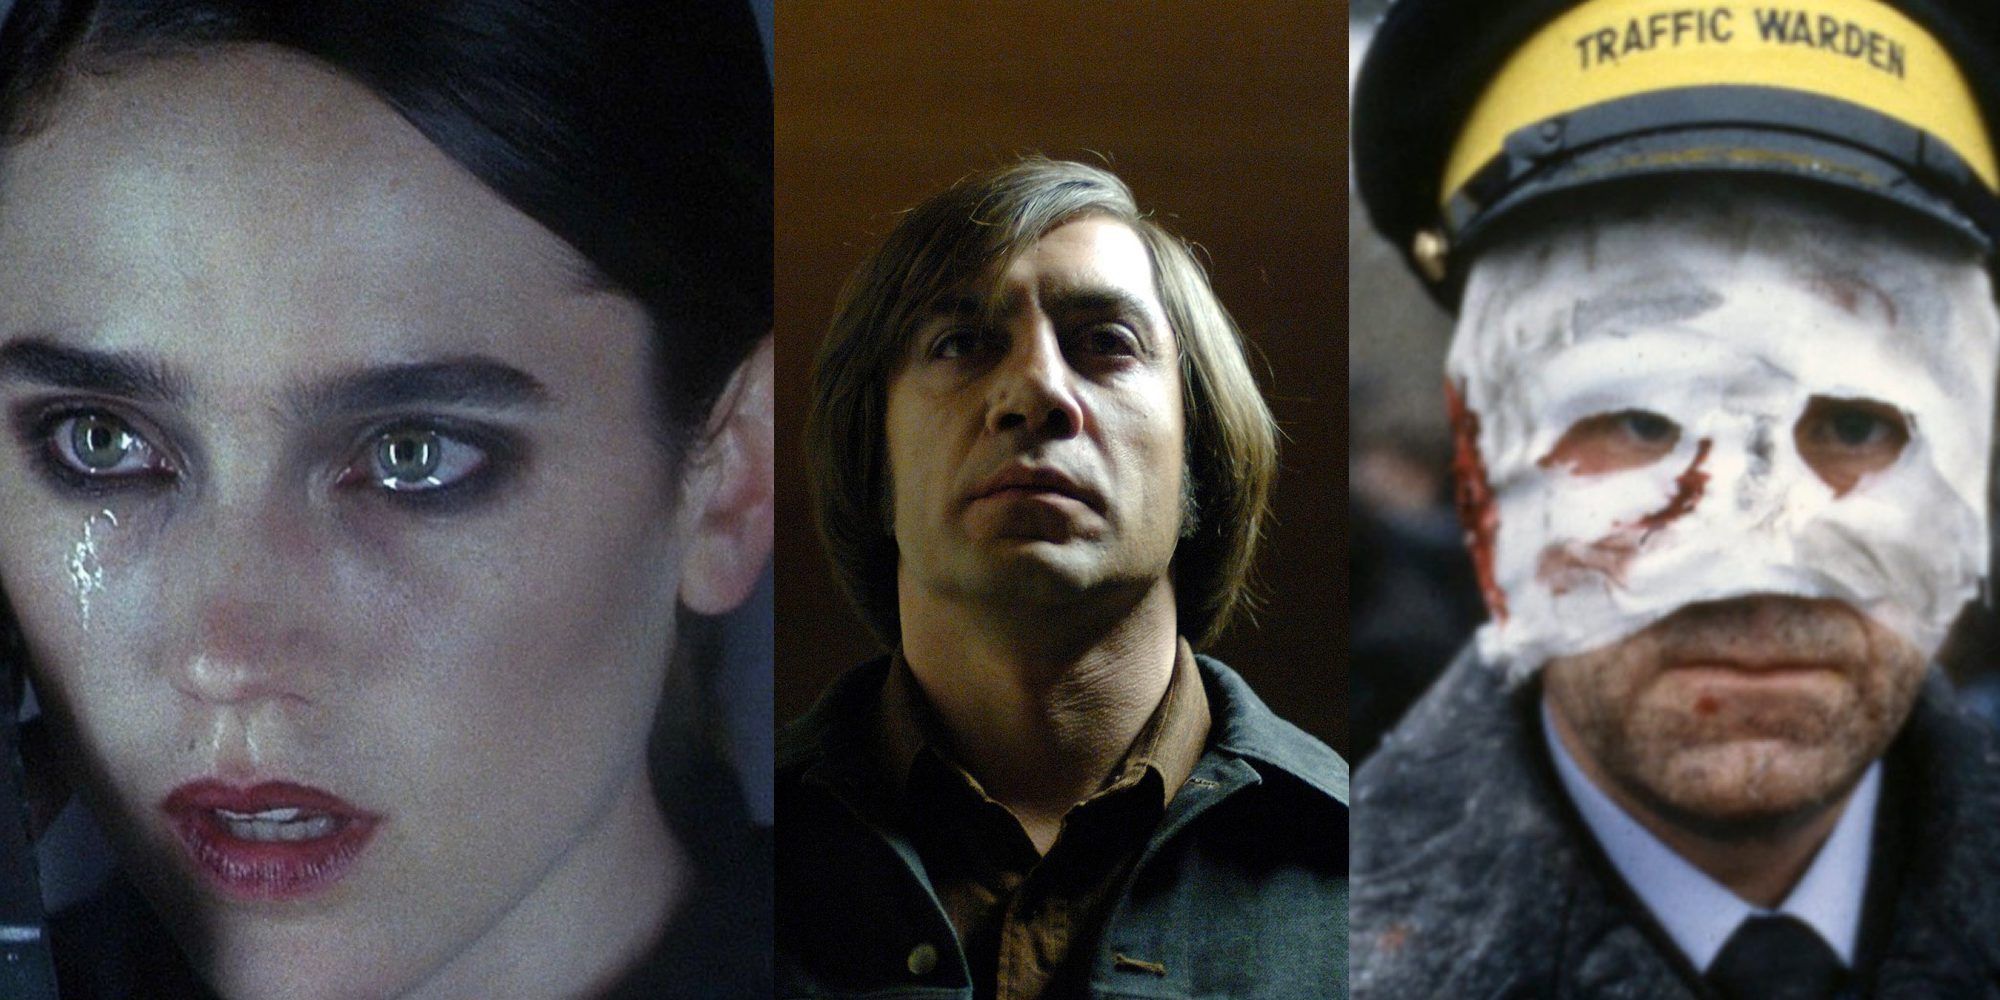 Split image of a police officer from Threads, Javier Bardem from No Country For Old Men, and Jennifer Connelly from Requiem For A Dream